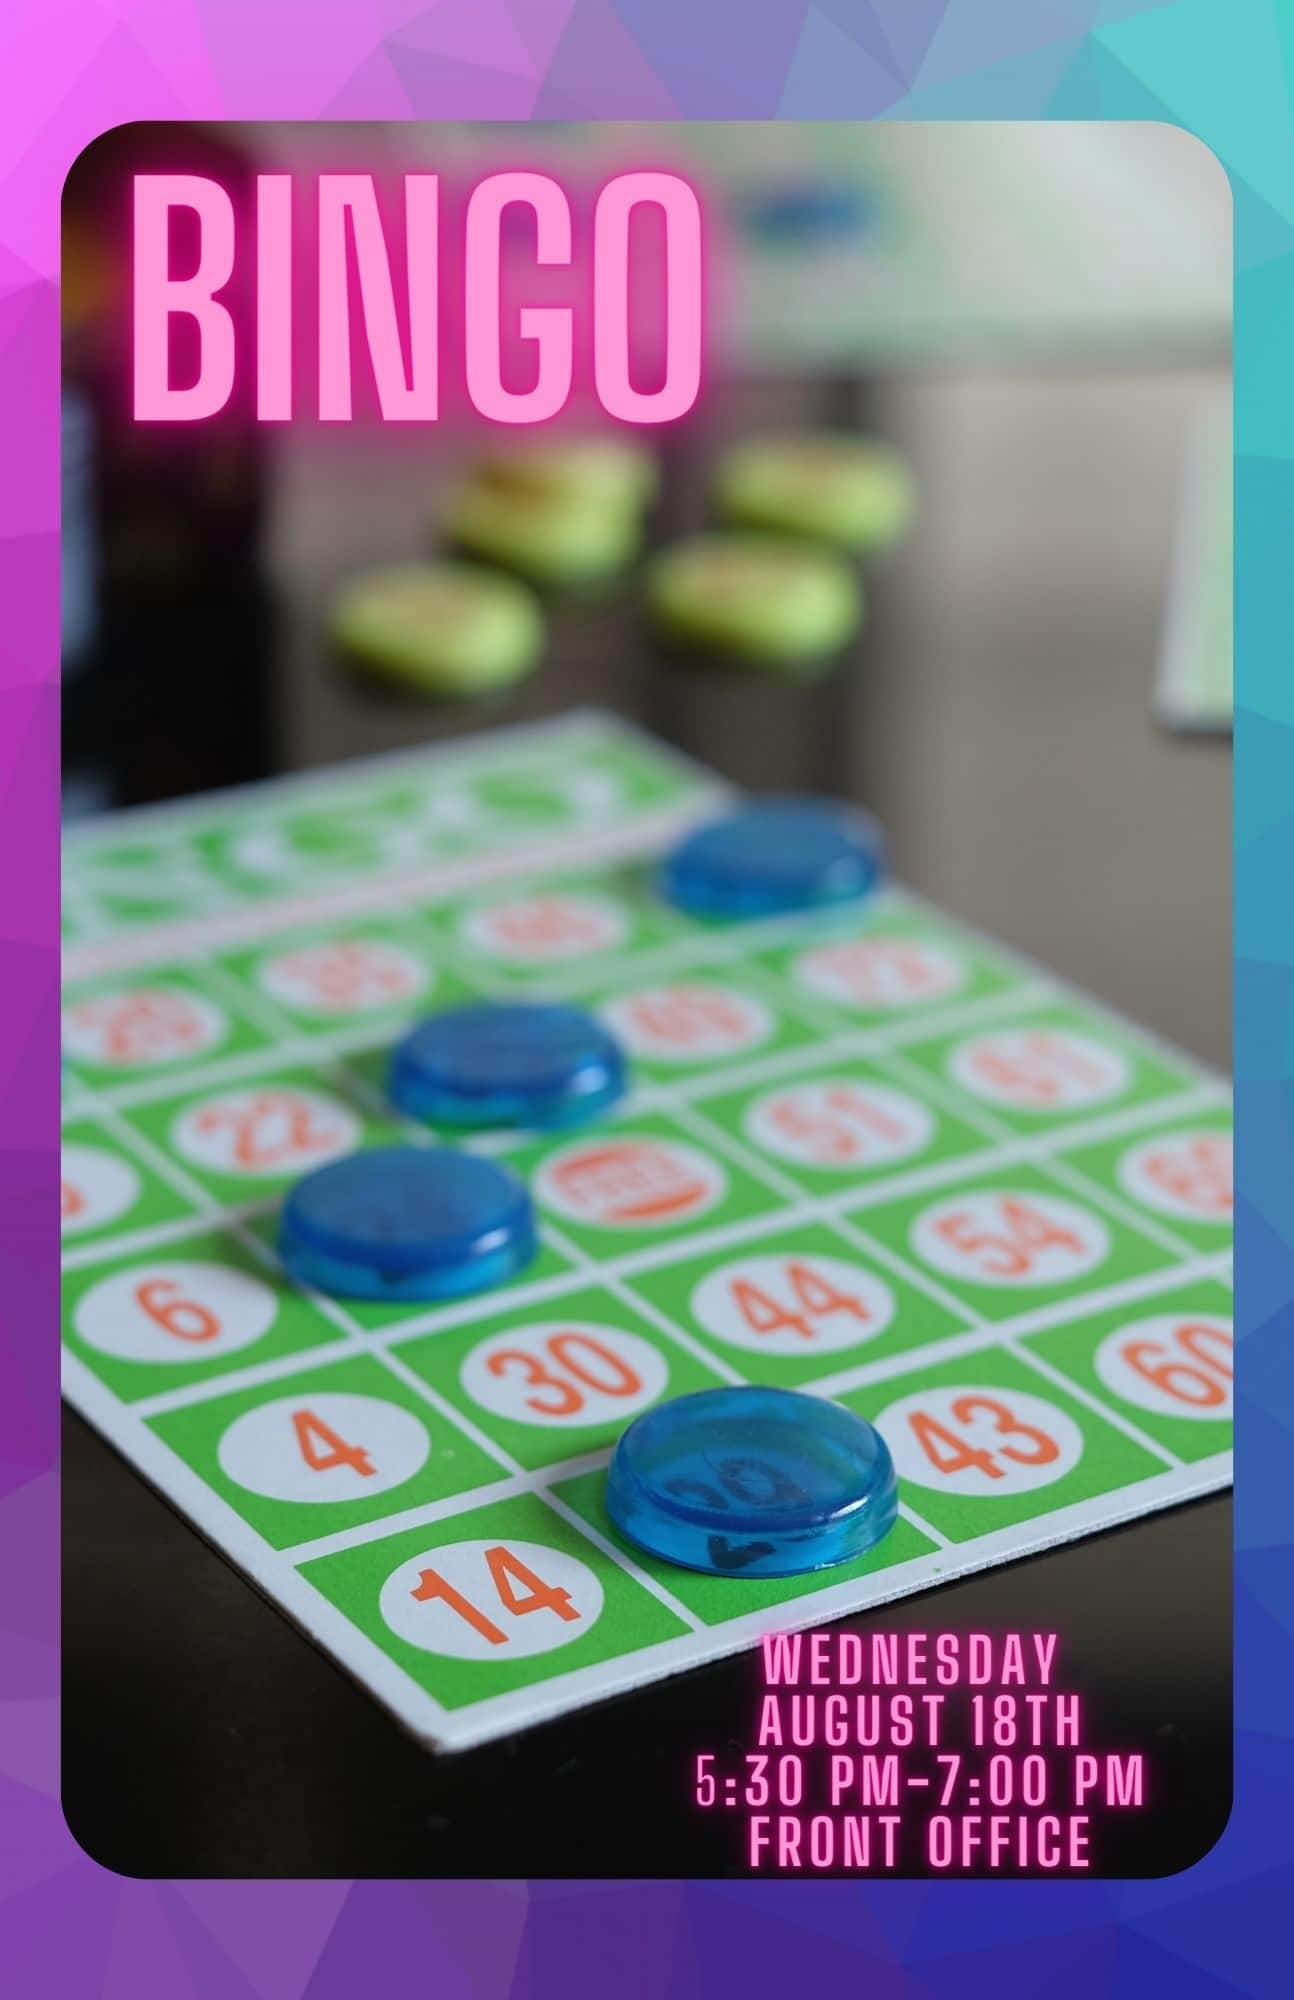 A flyer advertising bingo events at apartments in The Woodlands, TX.